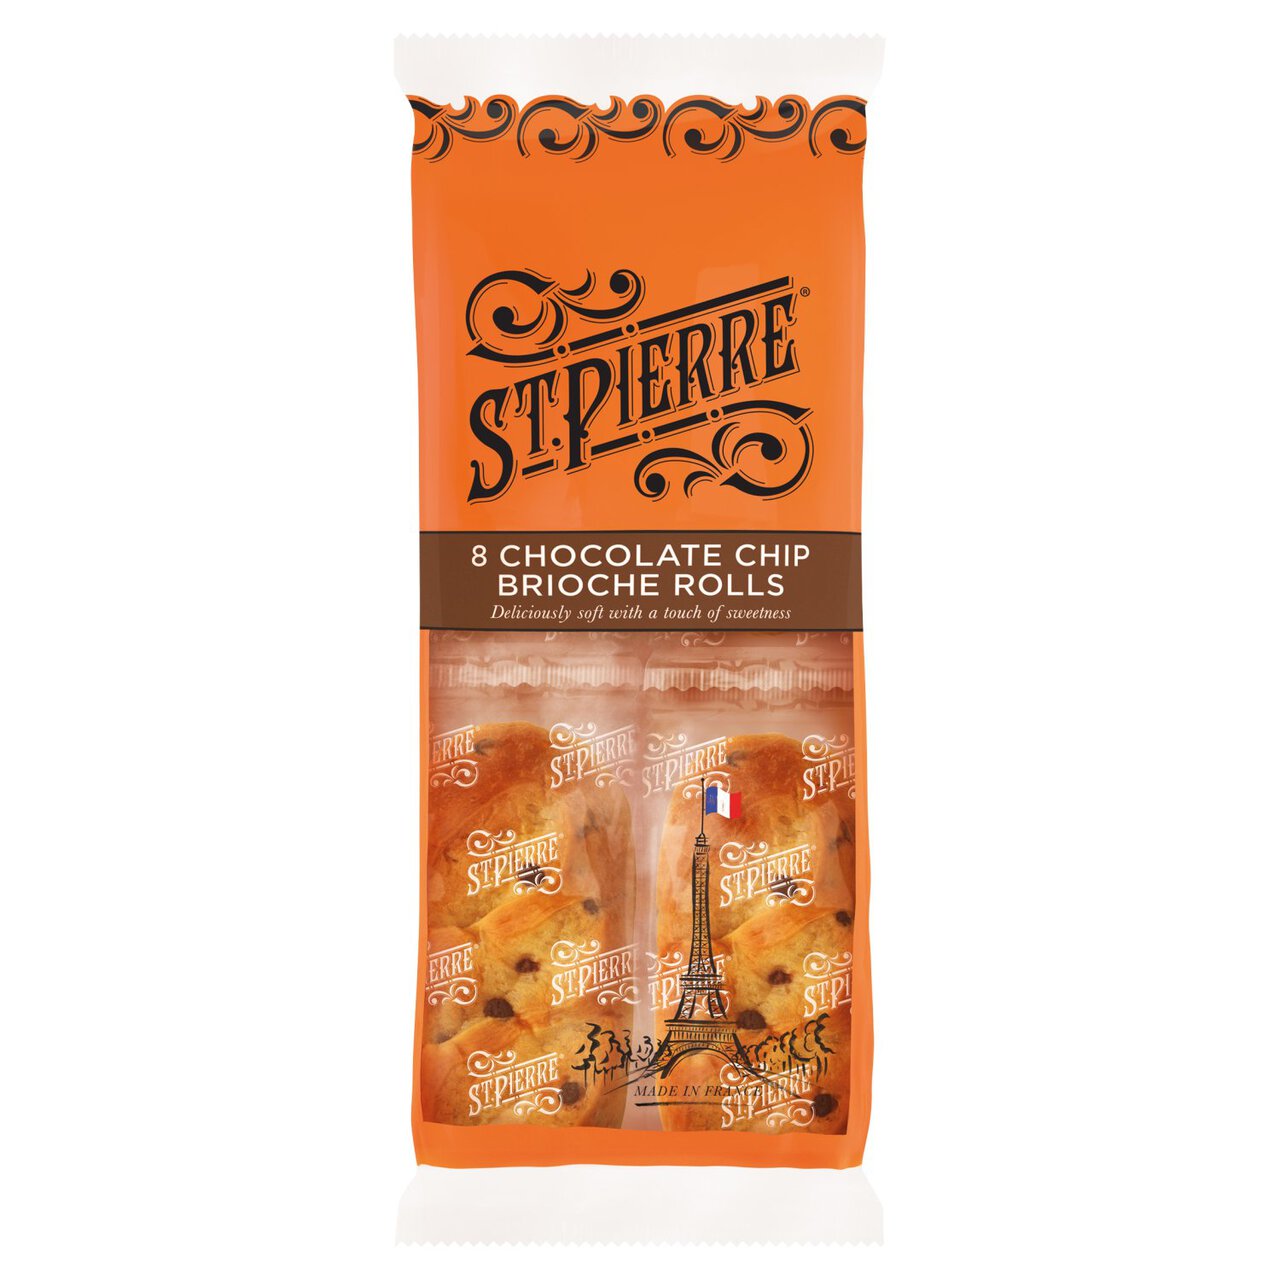 St Pierre Choc Chip Brioche Rolls Individually Wrapped 8 per pack